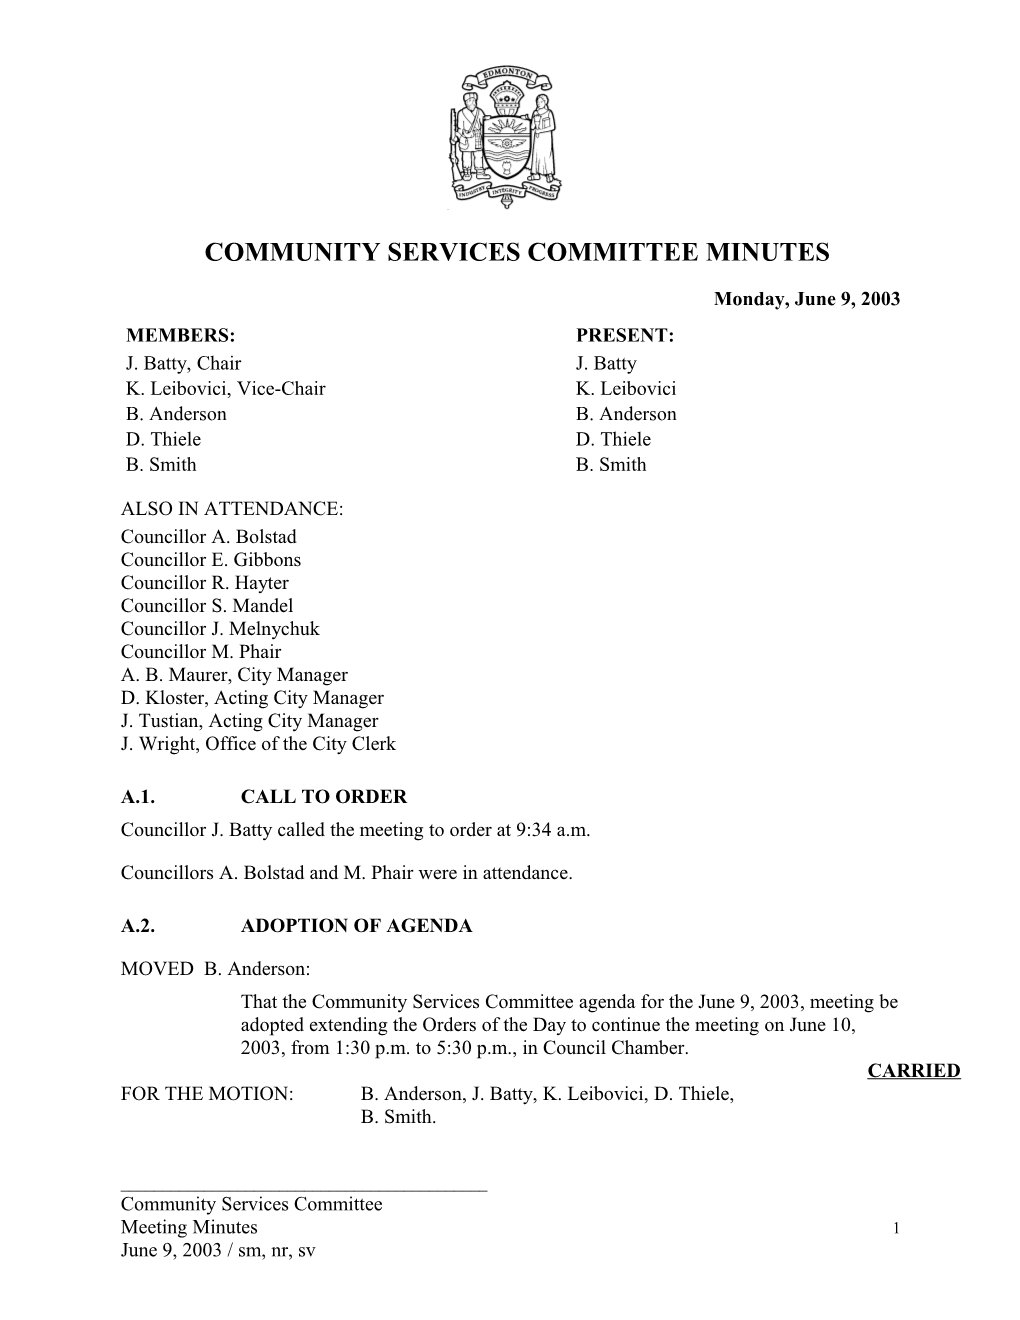 Minutes for Community Services Committee June 9, 2003 Meeting